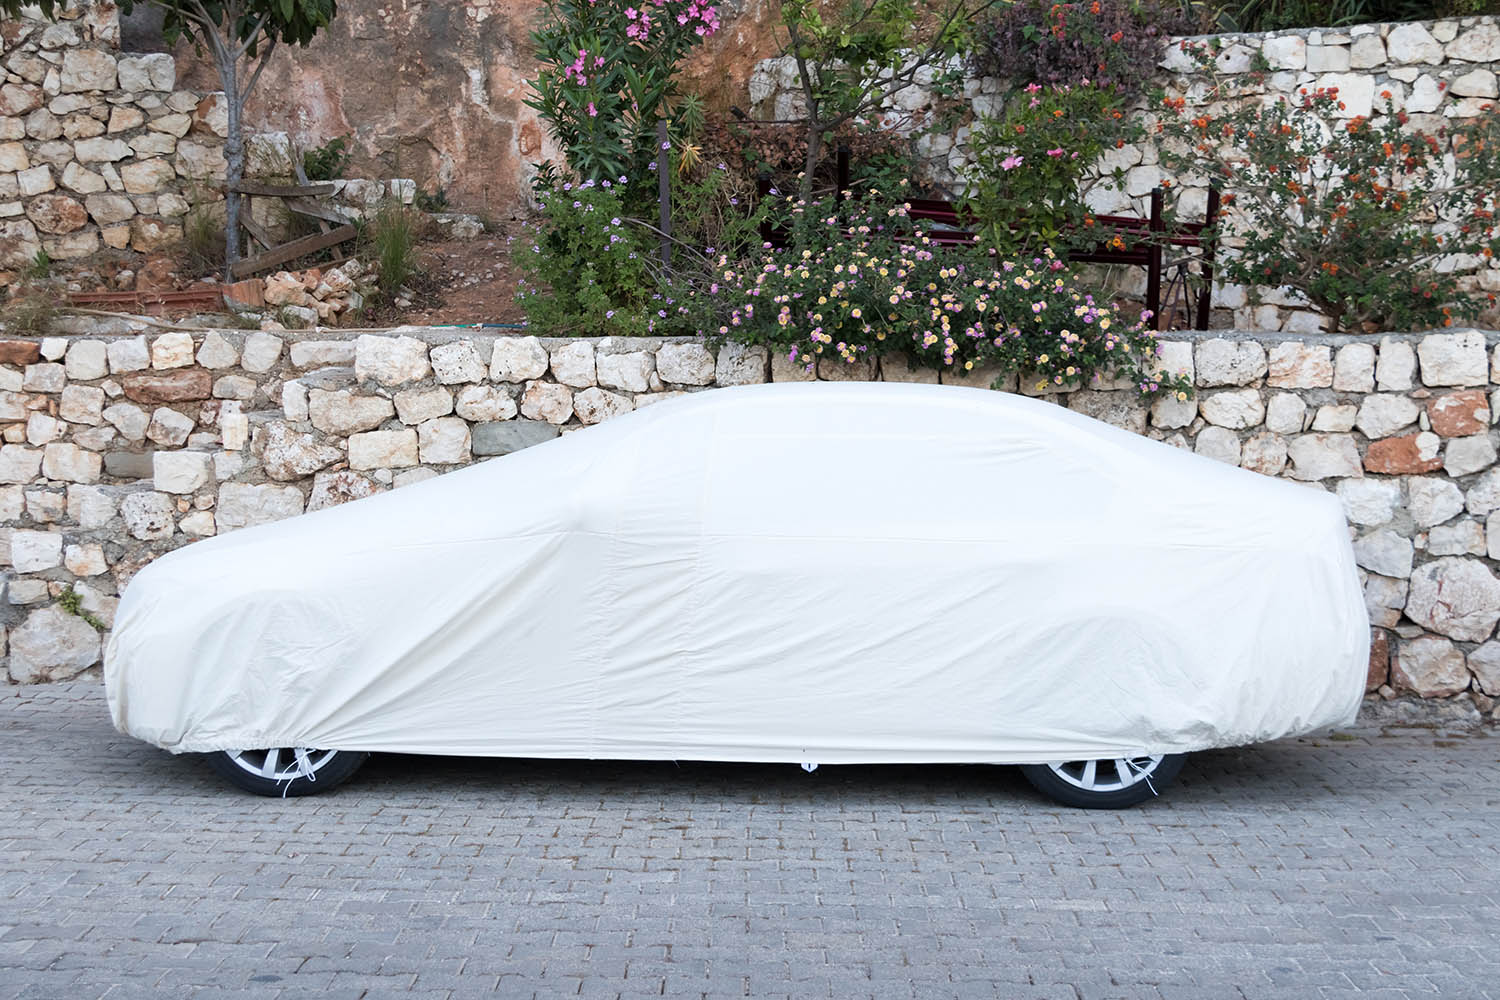 Car under cover parked next to stone wall